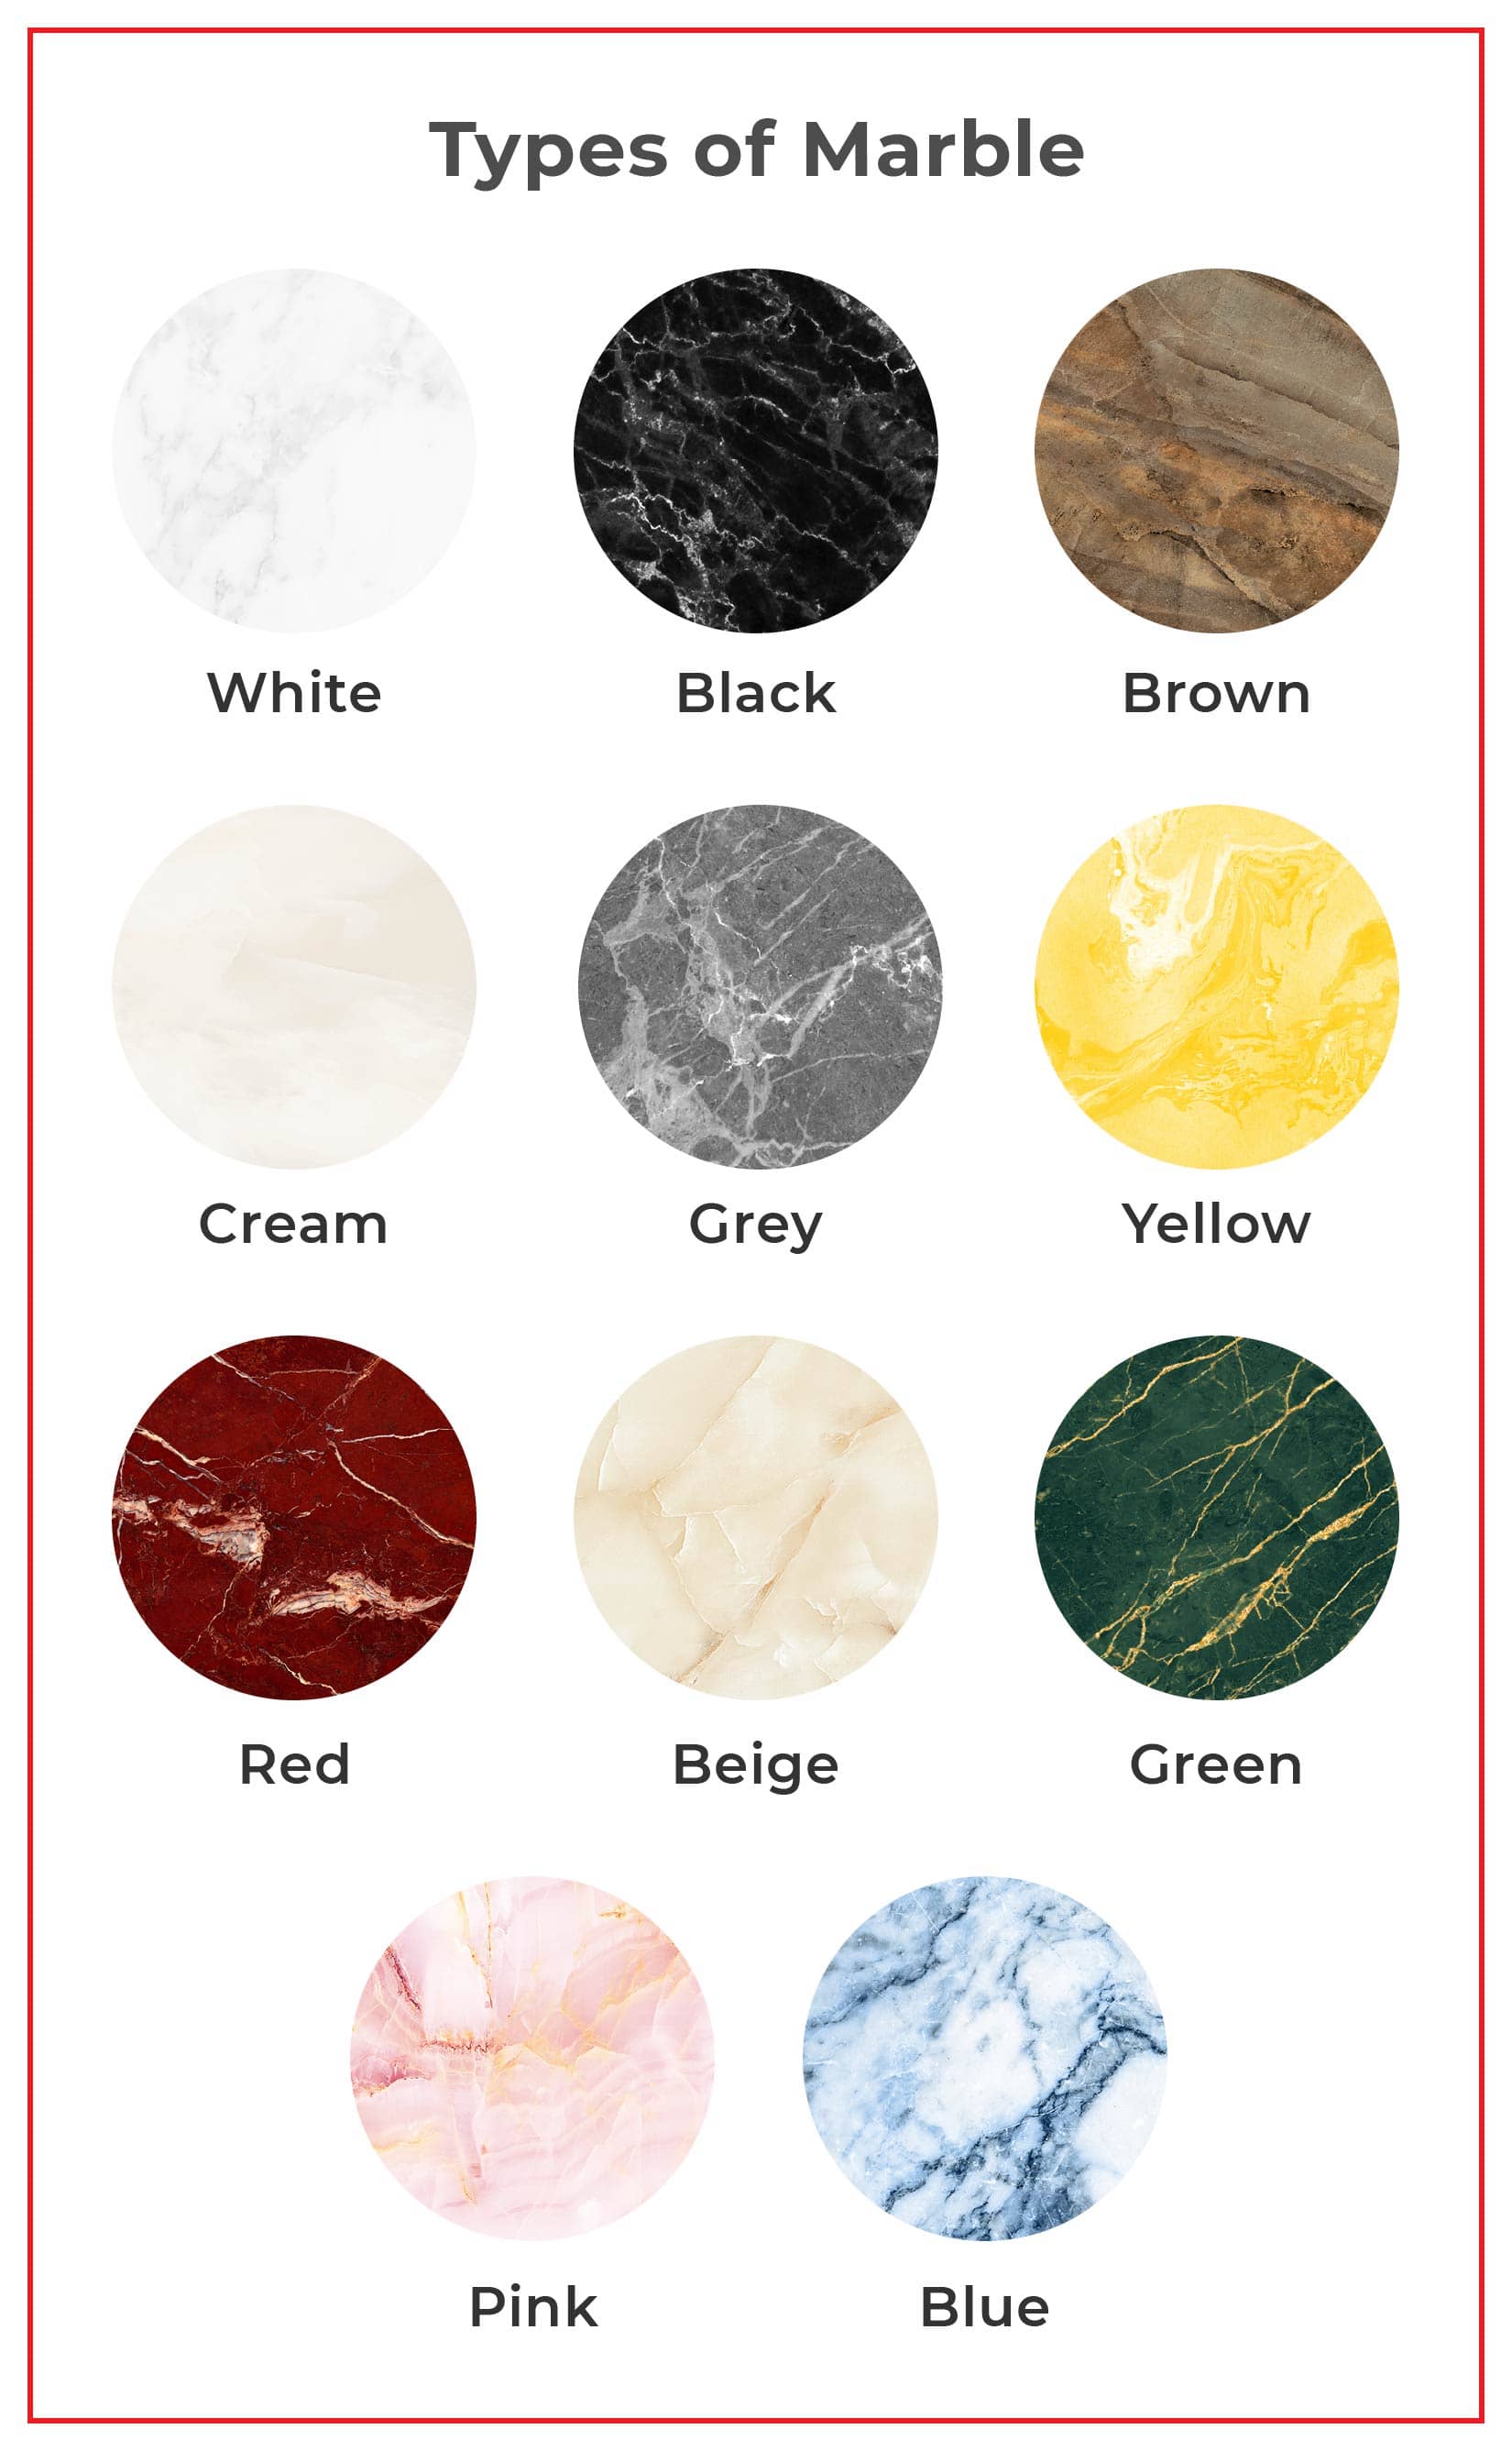 Image of 11 types of marble.